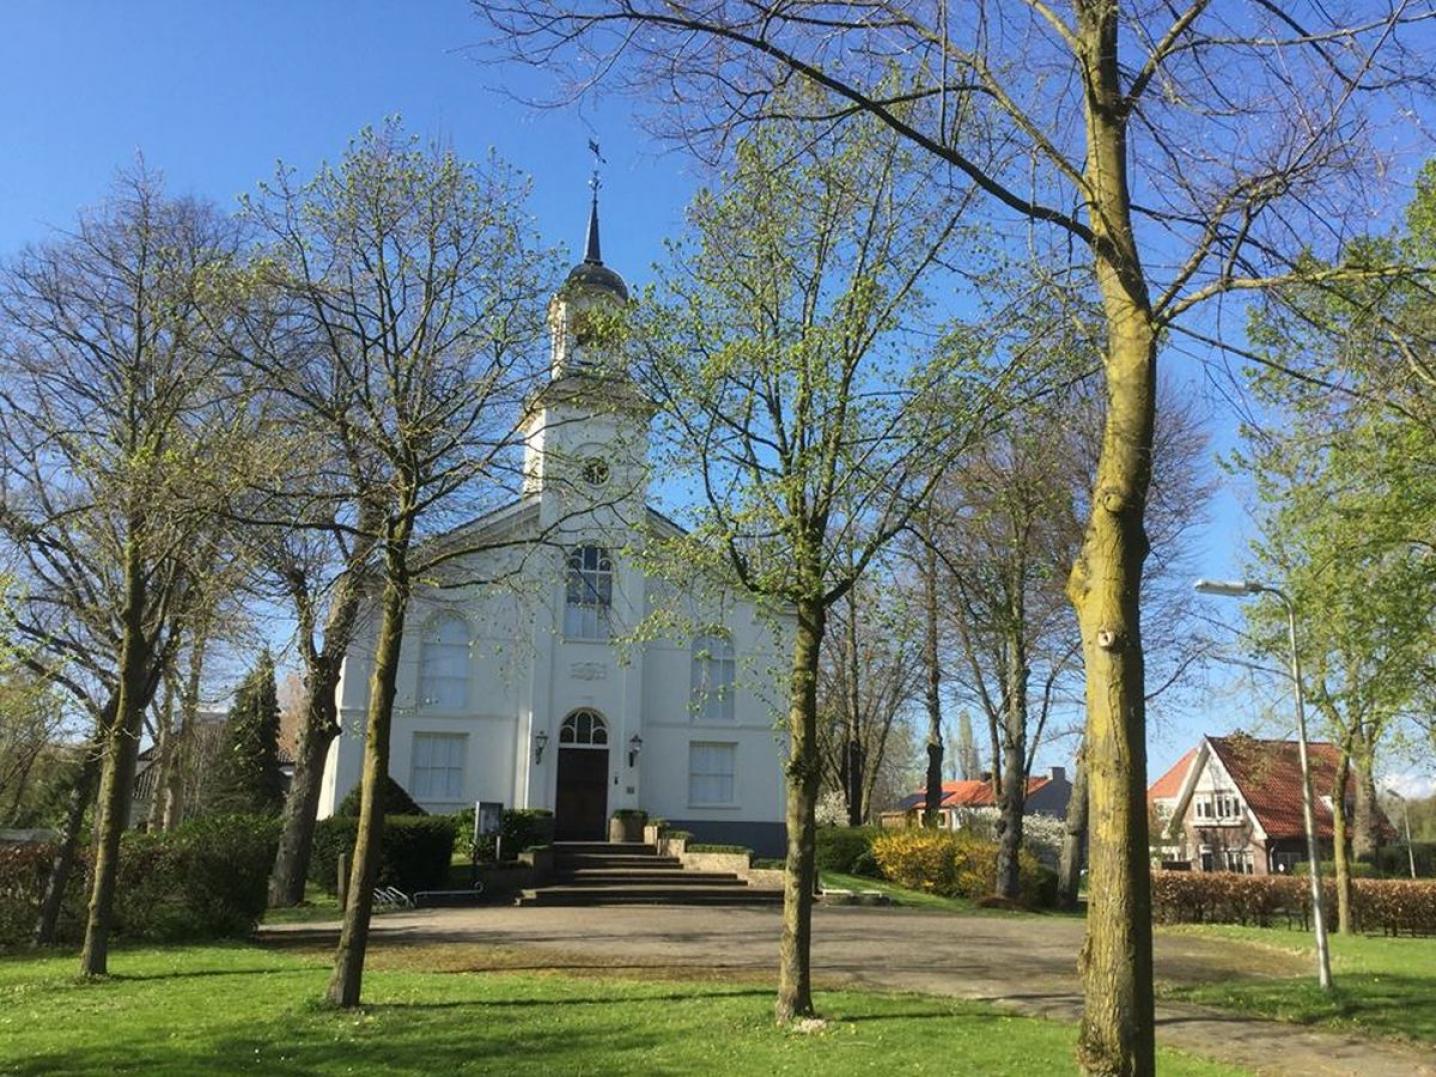 An old white building with large tower in the middle, a lawn and trees suurounding it, serving as the Van 't  Lindenhoutmuseum in Nijmegen